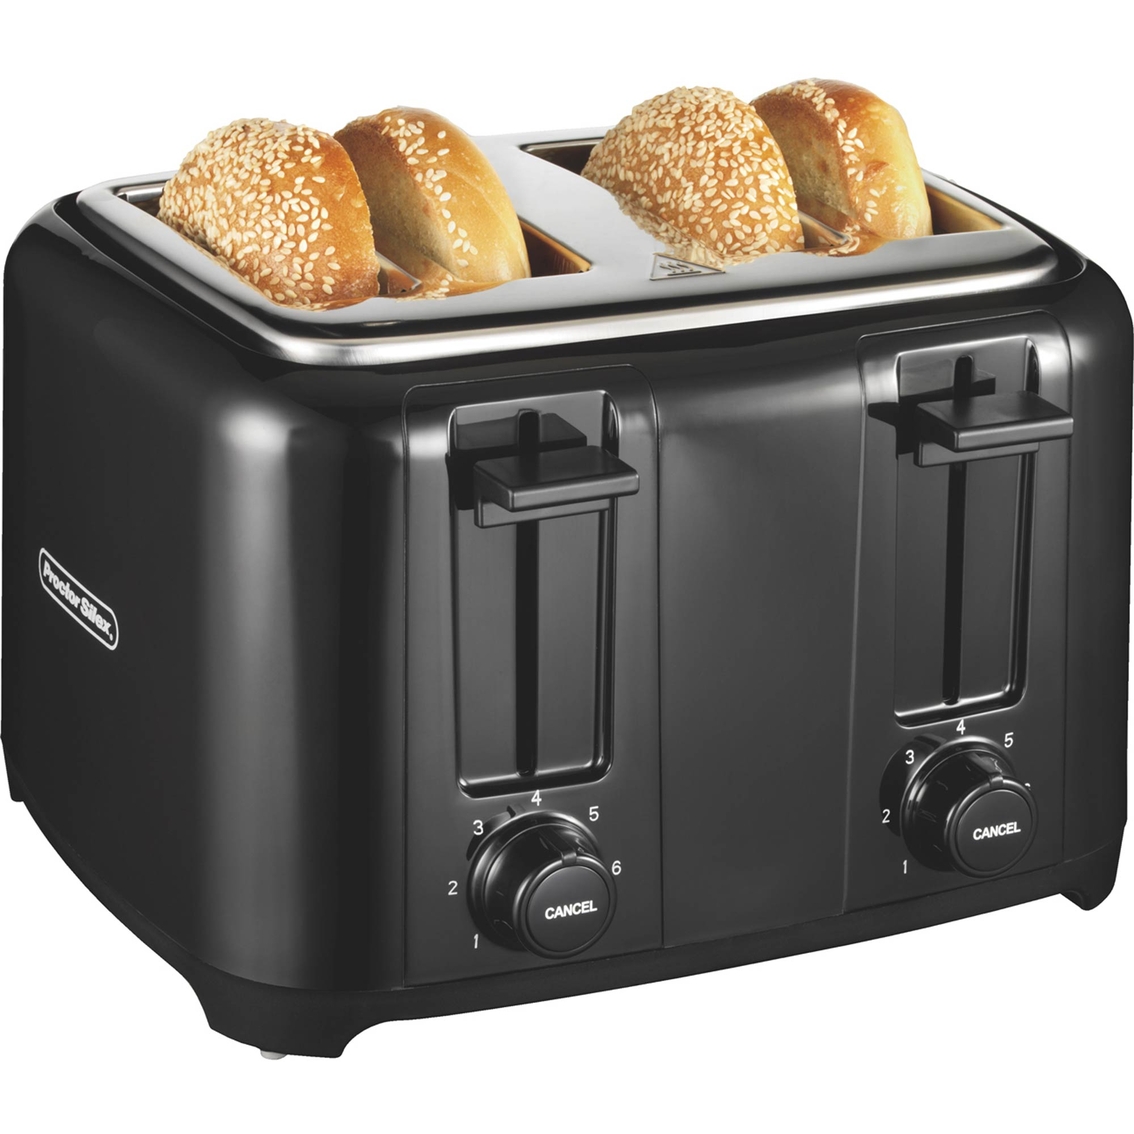 Proctor Silex Durable 4 Slice Toaster with Wide Slots and Cool Touch  24215